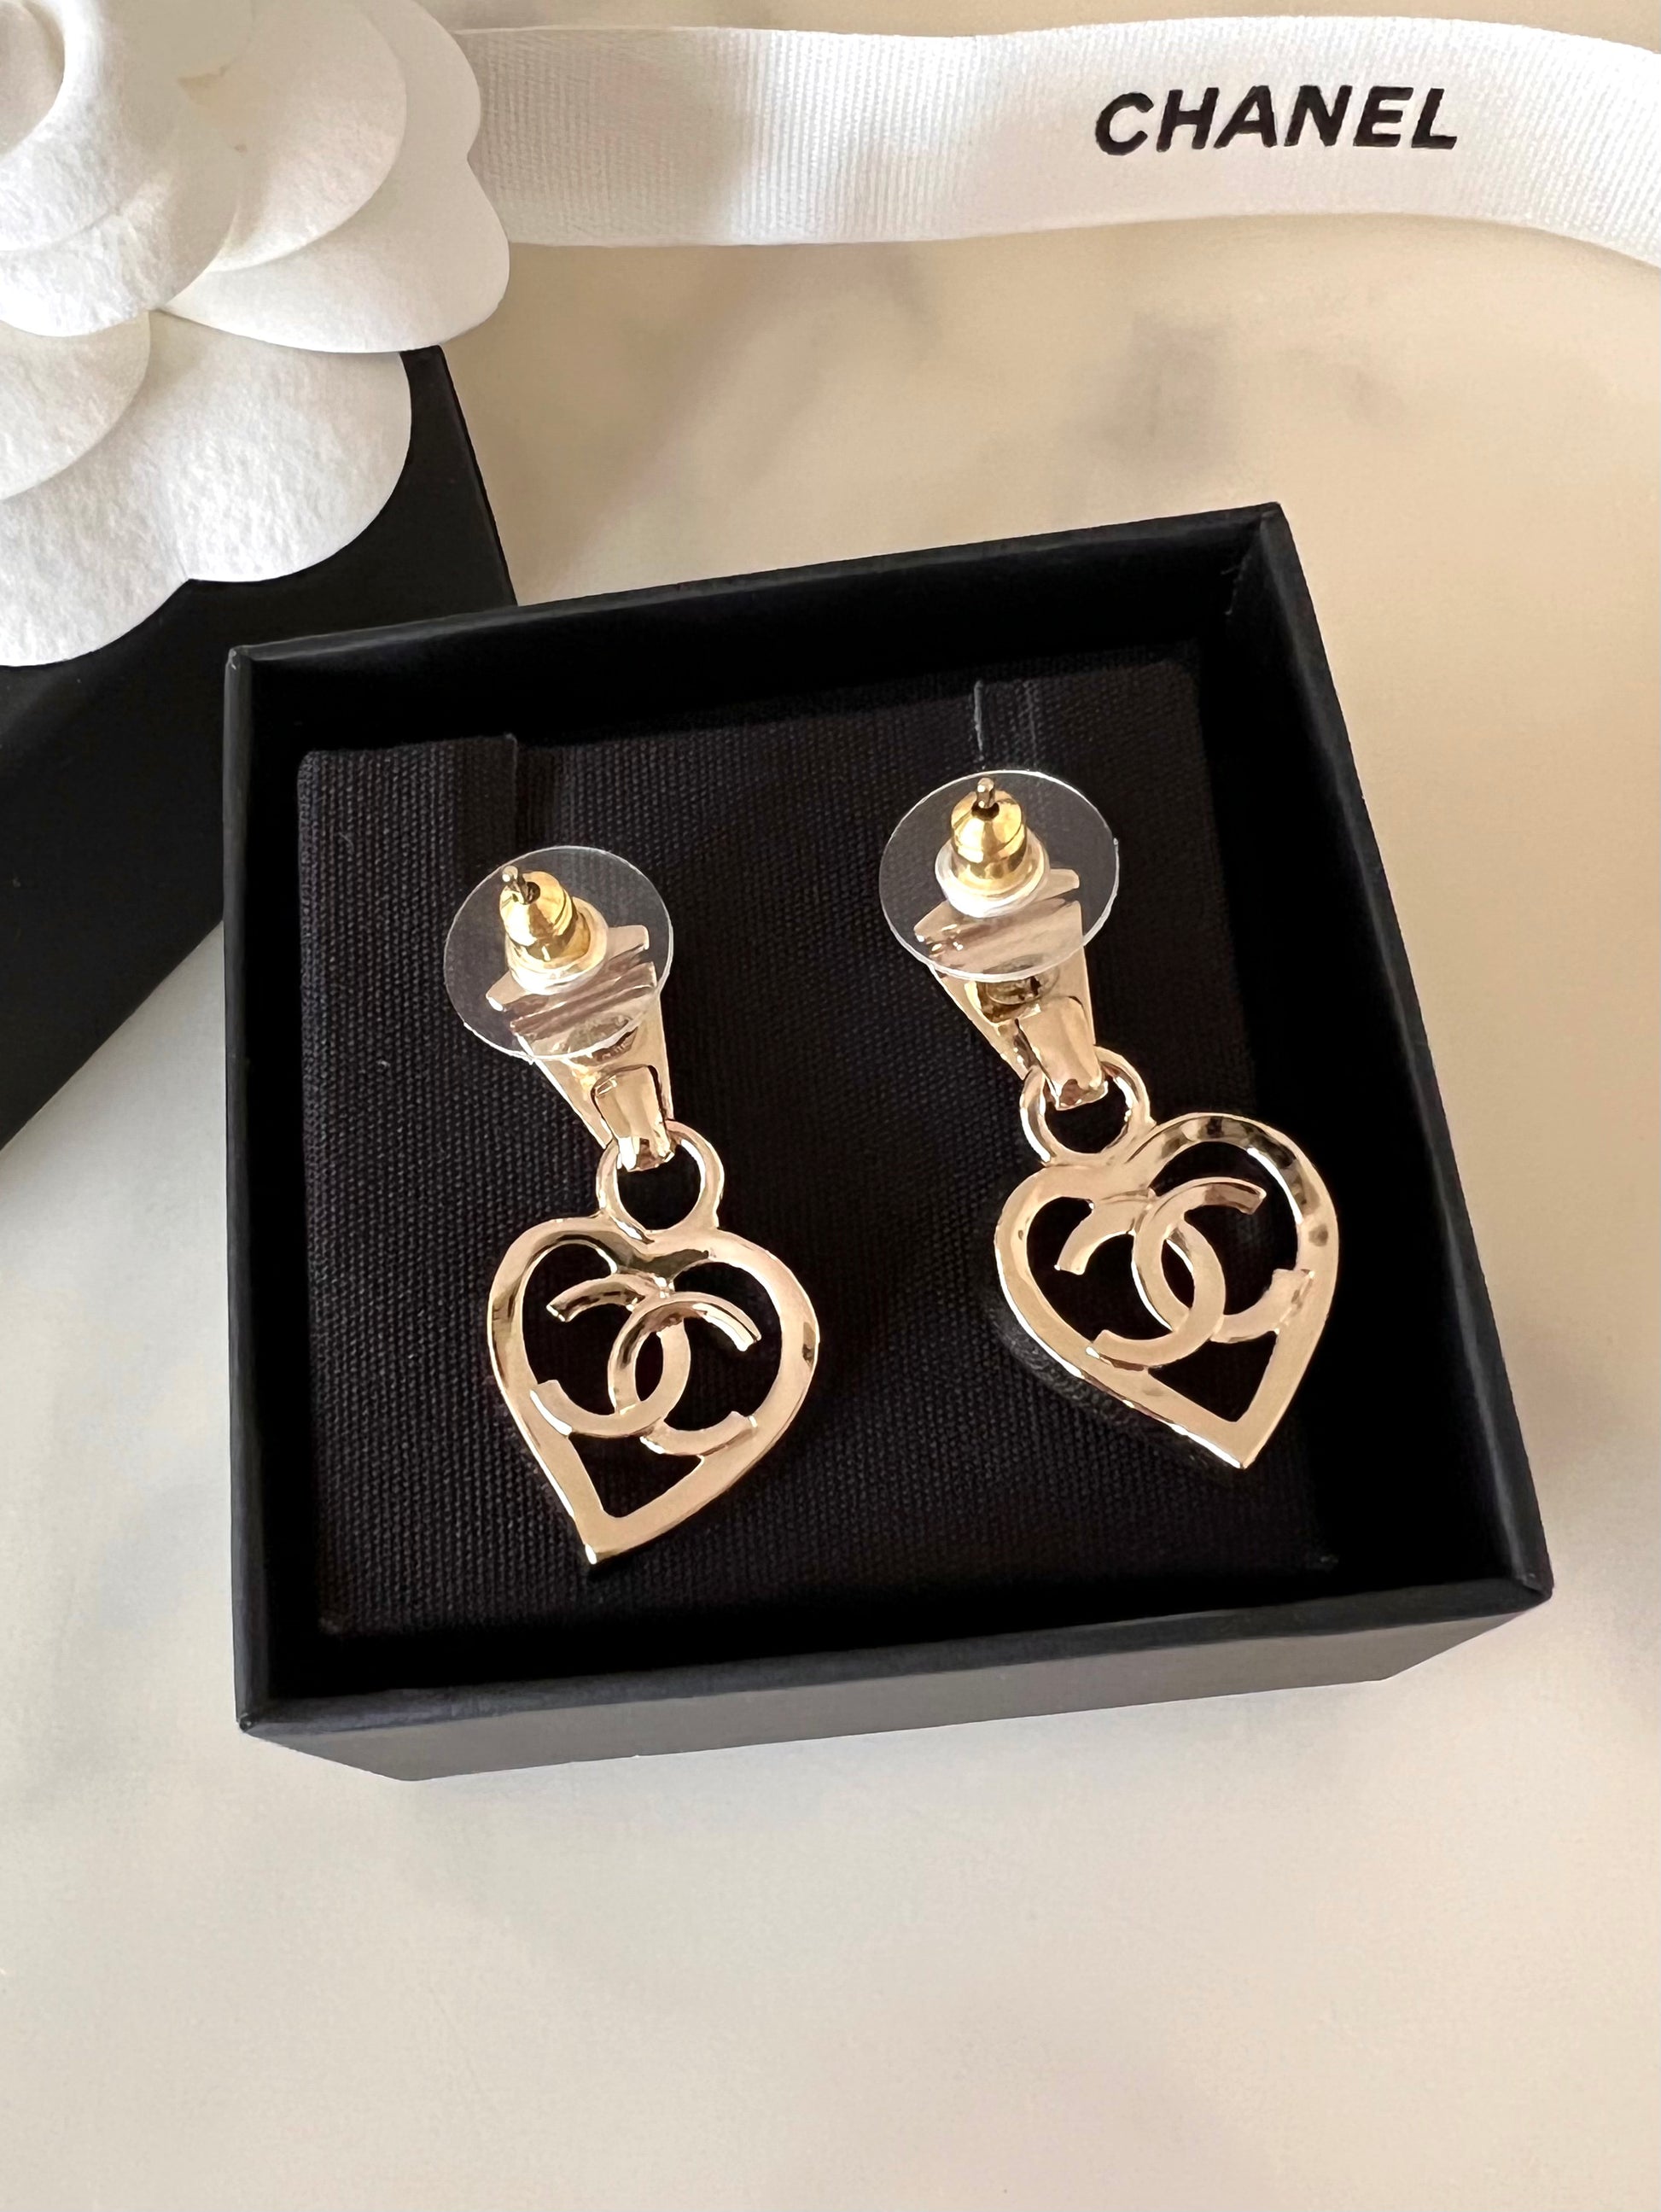 CHANEL 23C Heart Hoop CC Earrings Light Gold Hardware – AYAINLOVE CURATED  LUXURIES